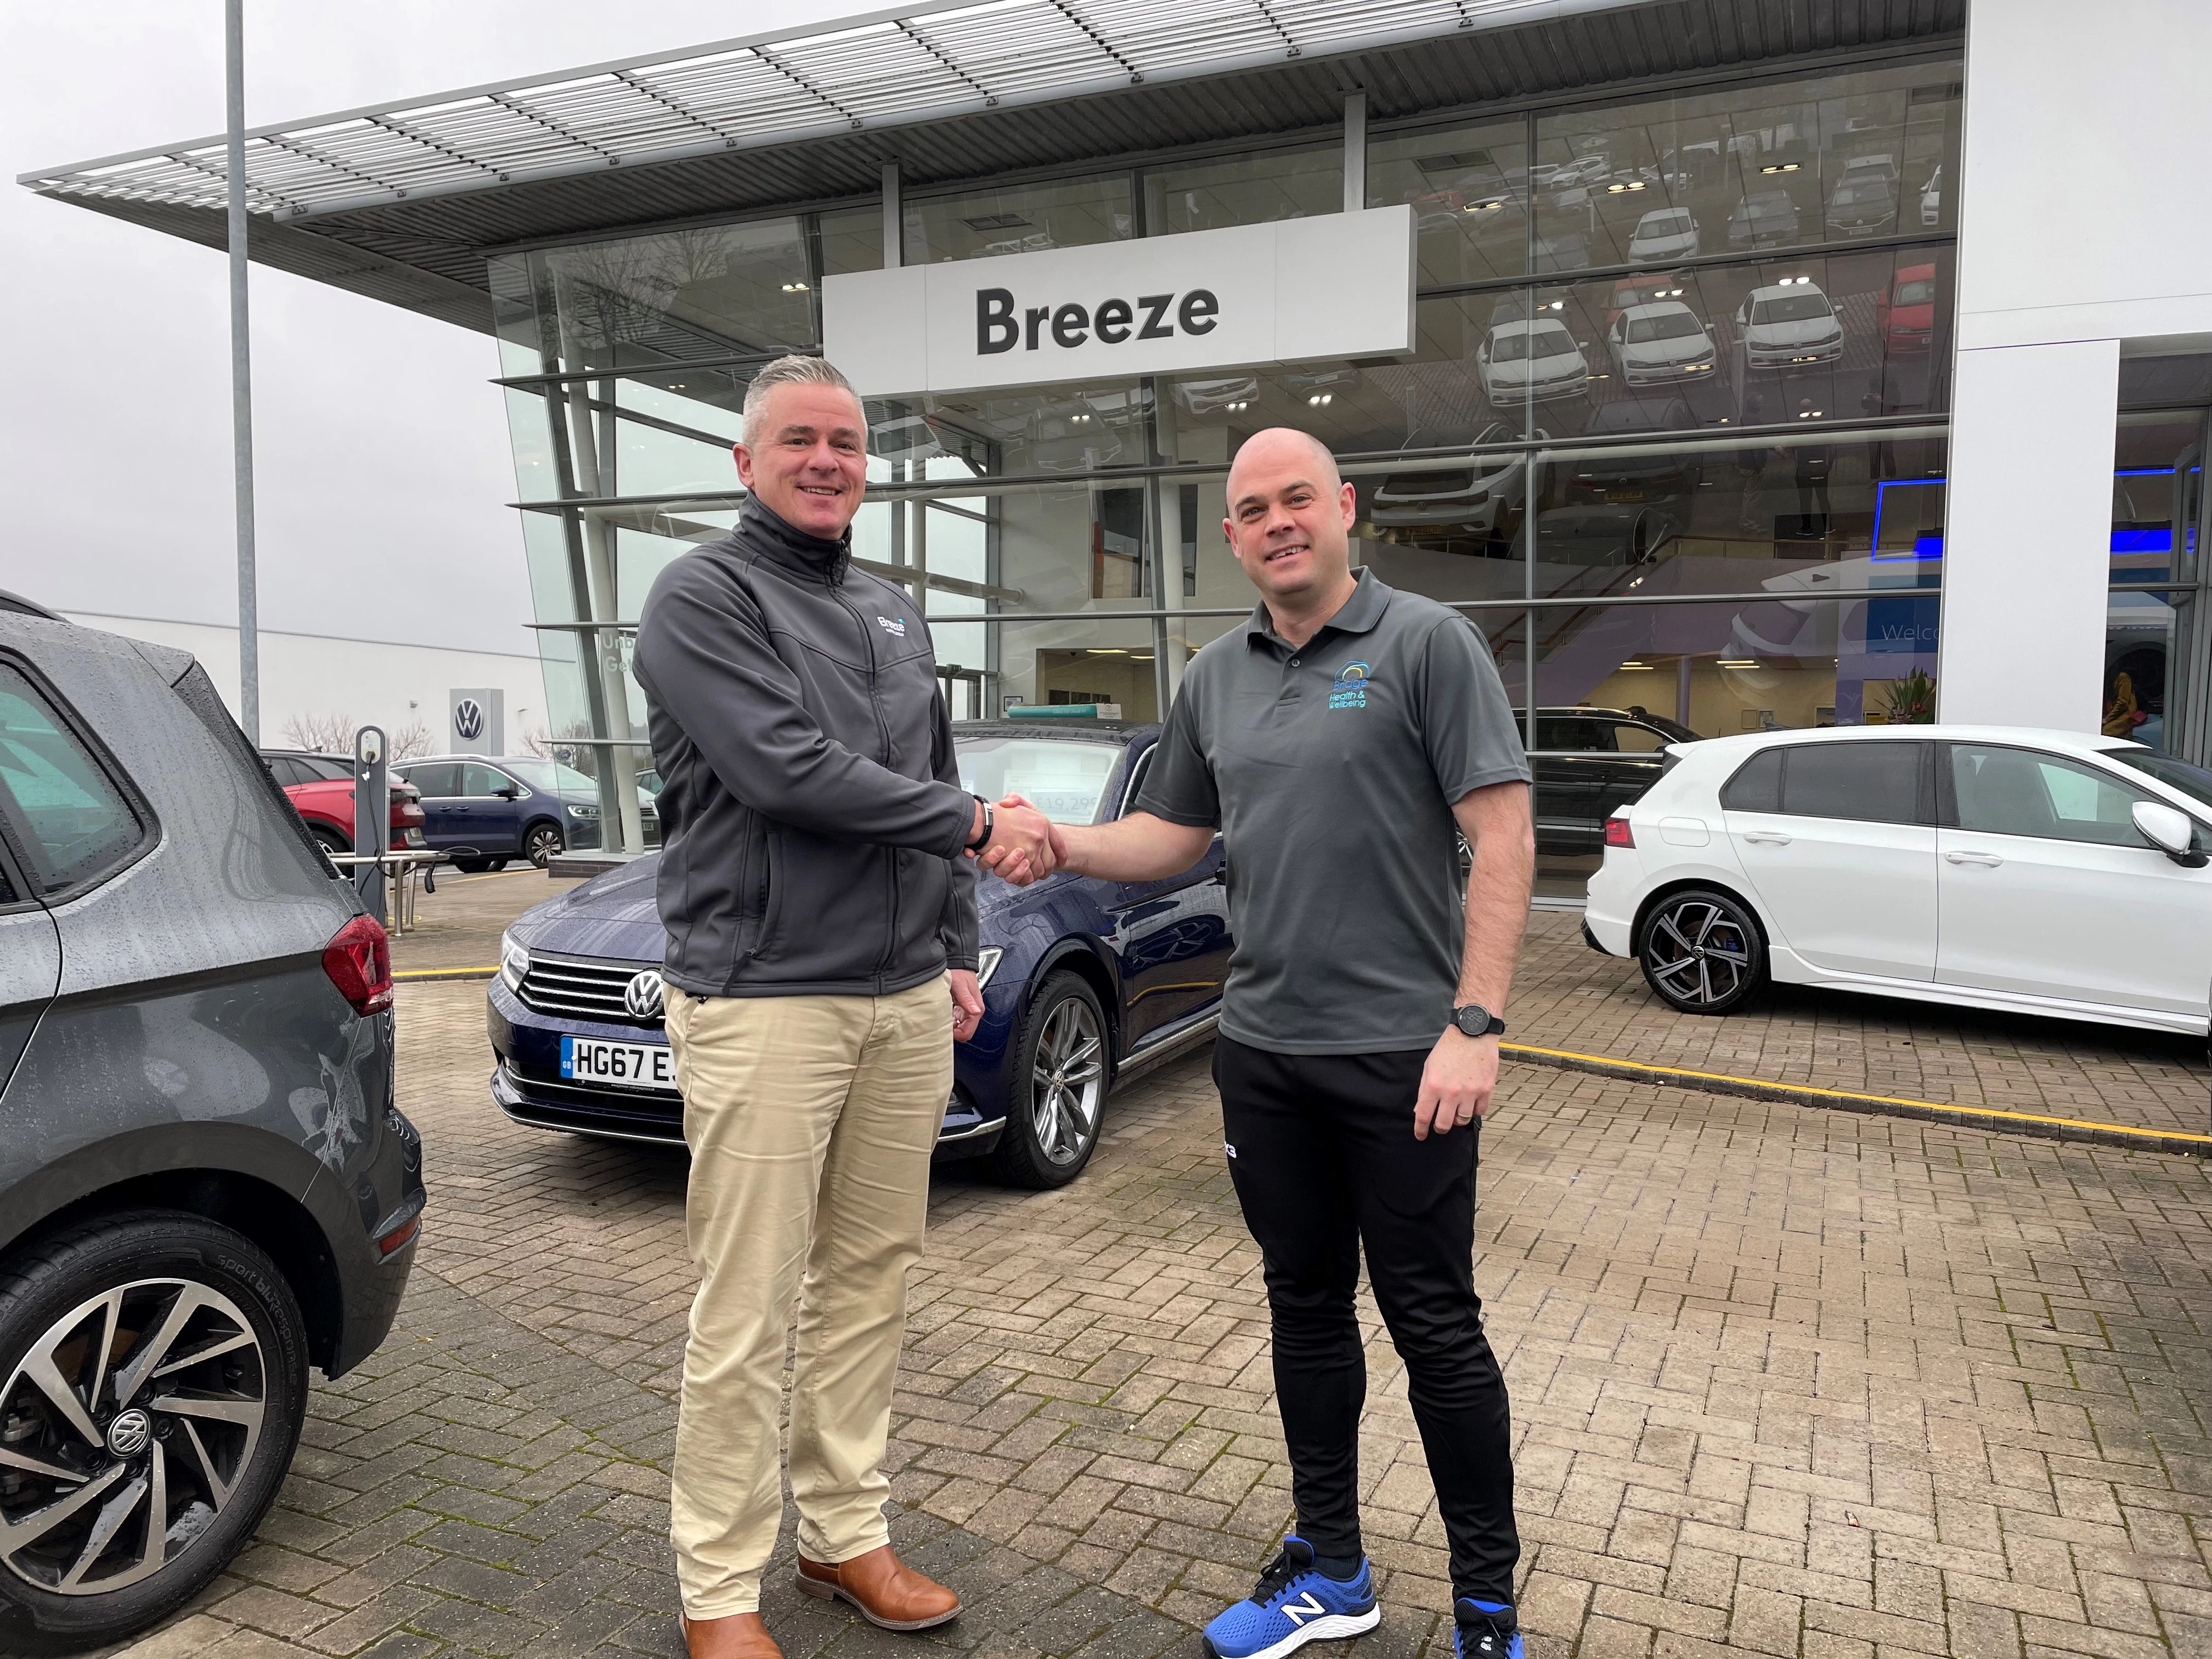 Mark Langford of Breeze Motor Group and Paul O'Connell of Bridge Health & Wellbeing